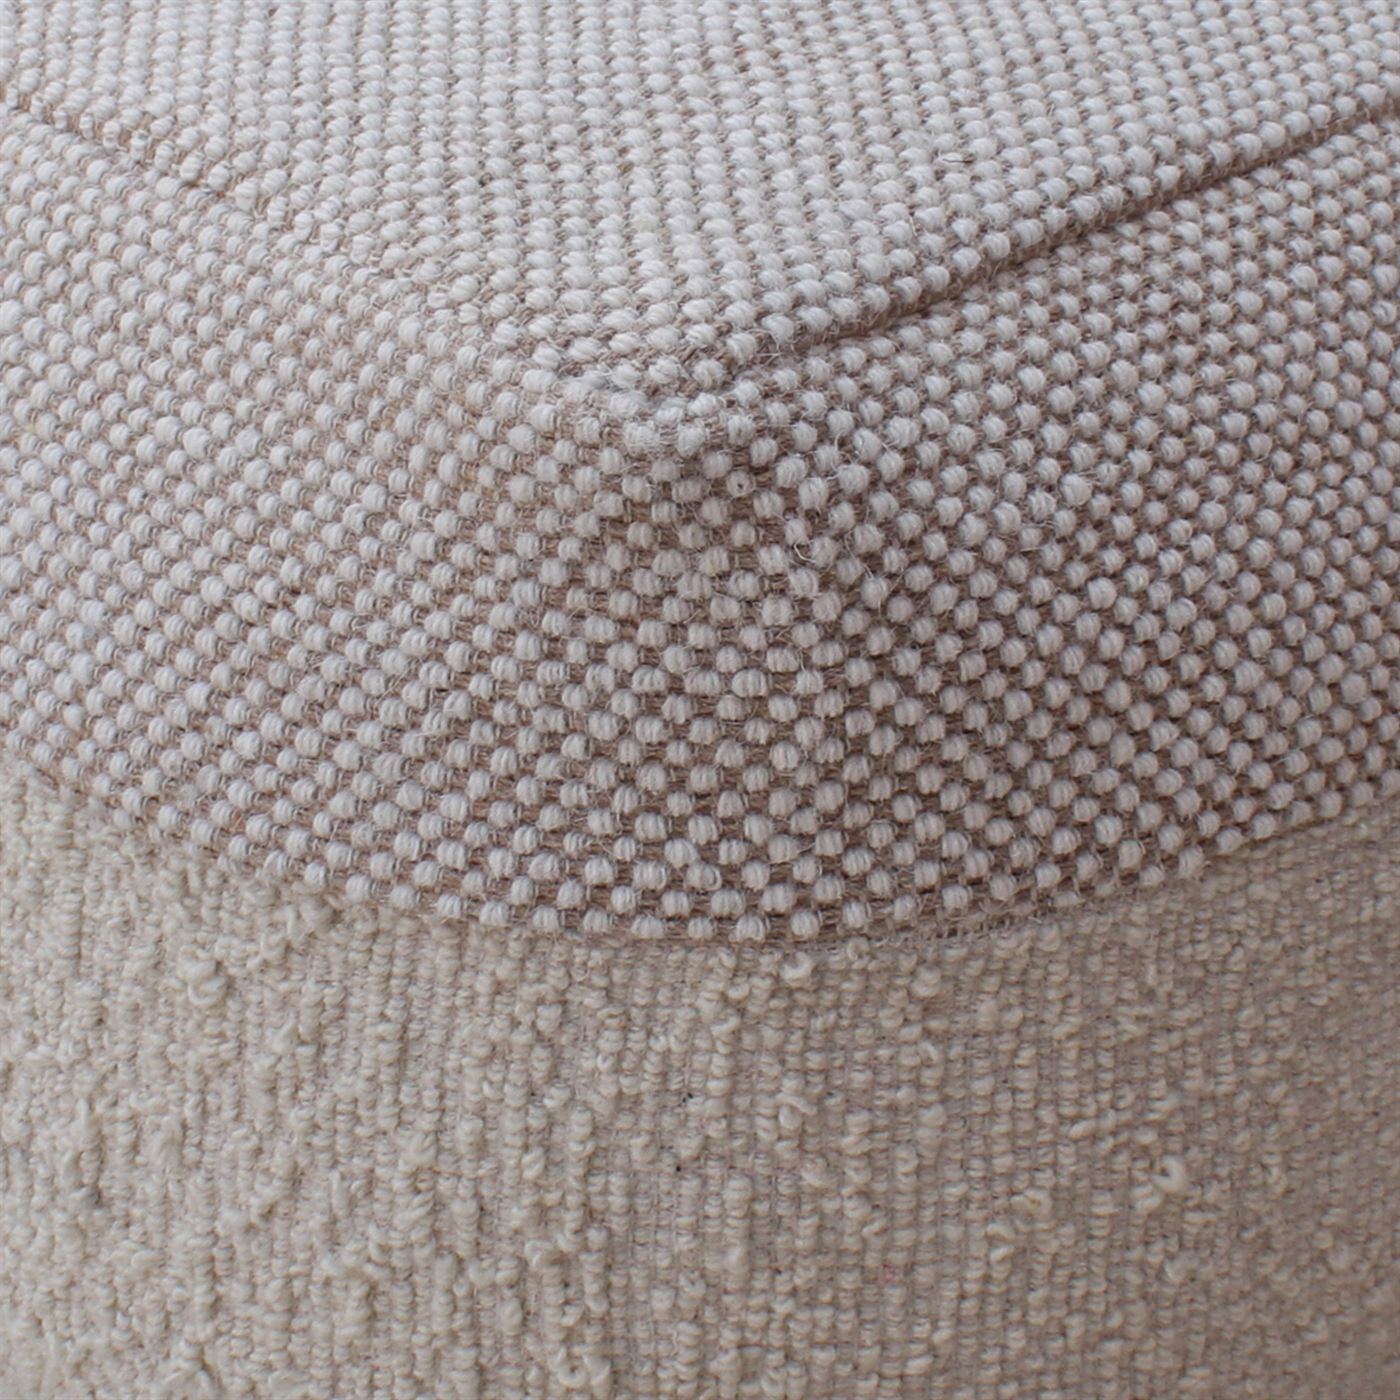 Orsis Pouf, Wool, Polyester, Natural White, Beige, Hand woven, All Loop 